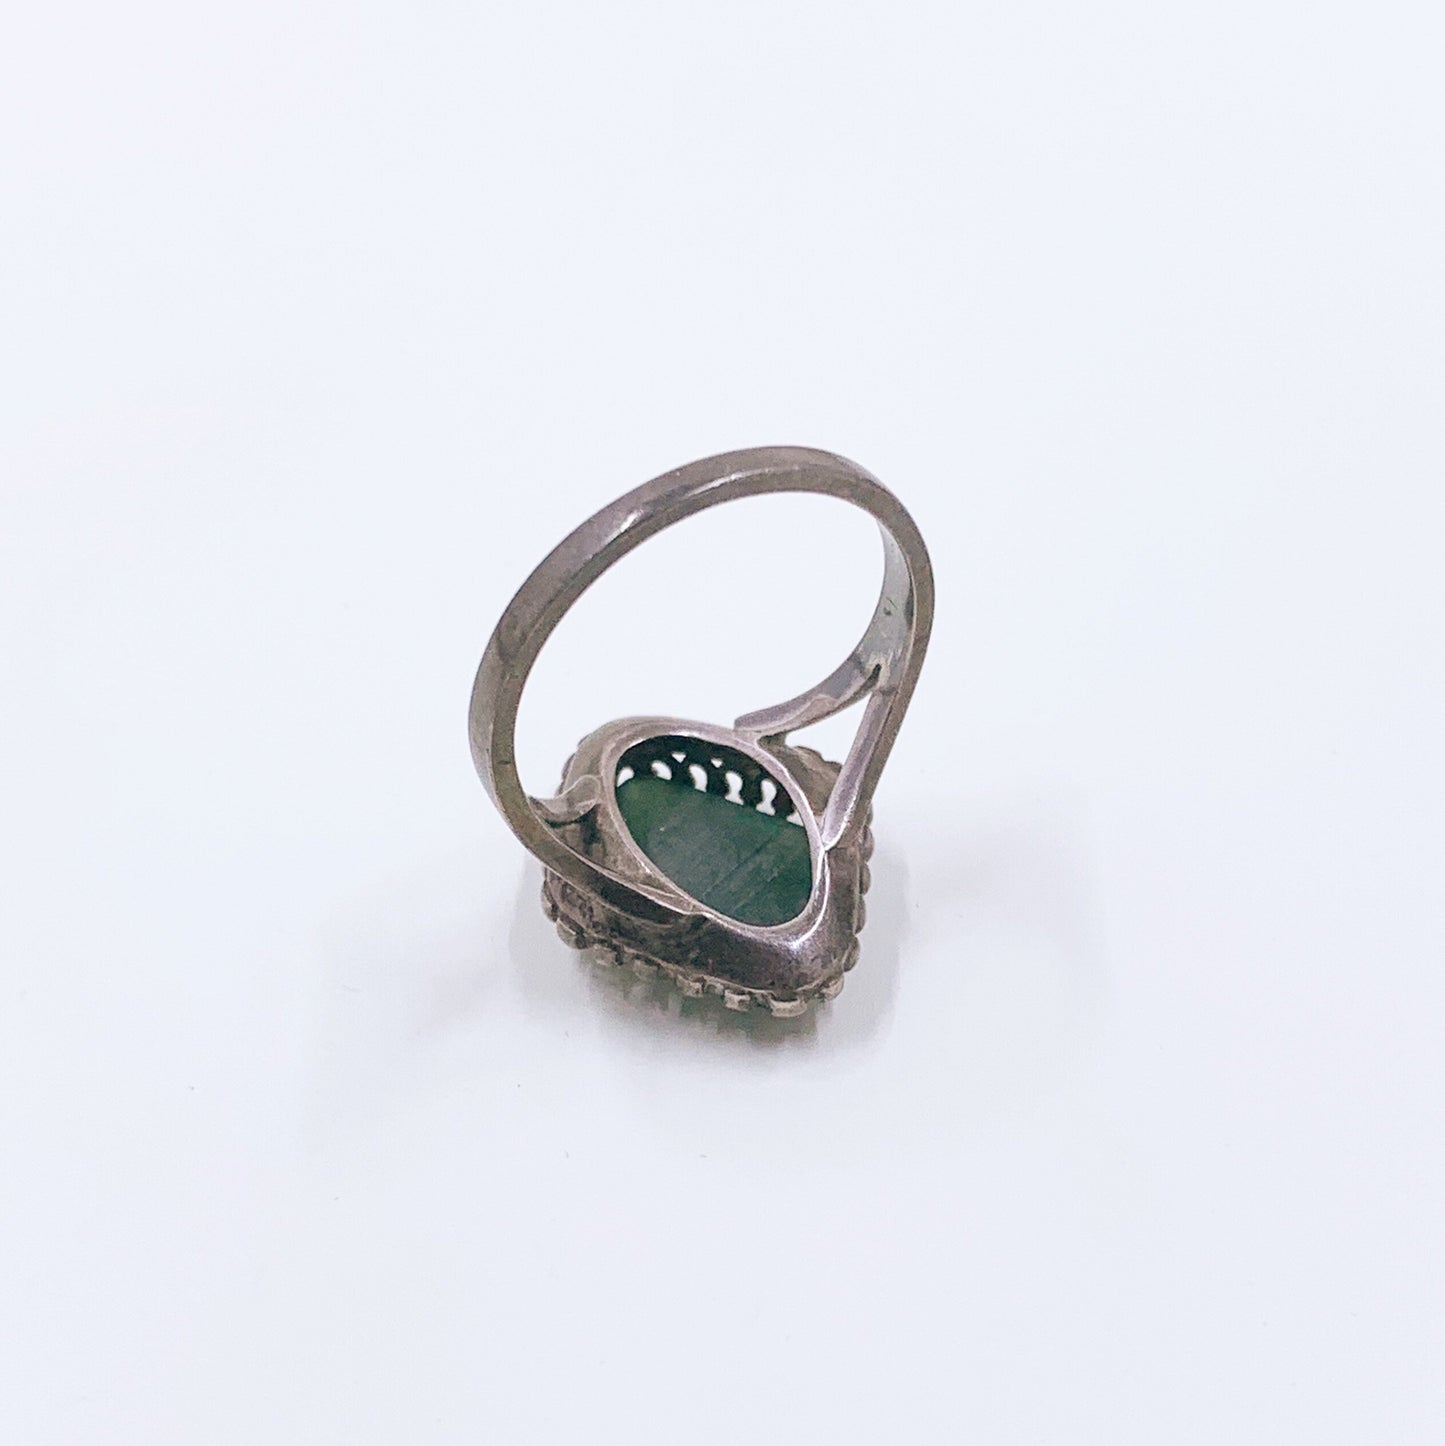 Antique Silver Green Stone Ring | Art Deco Green Stone Ring | Size 6 1/2